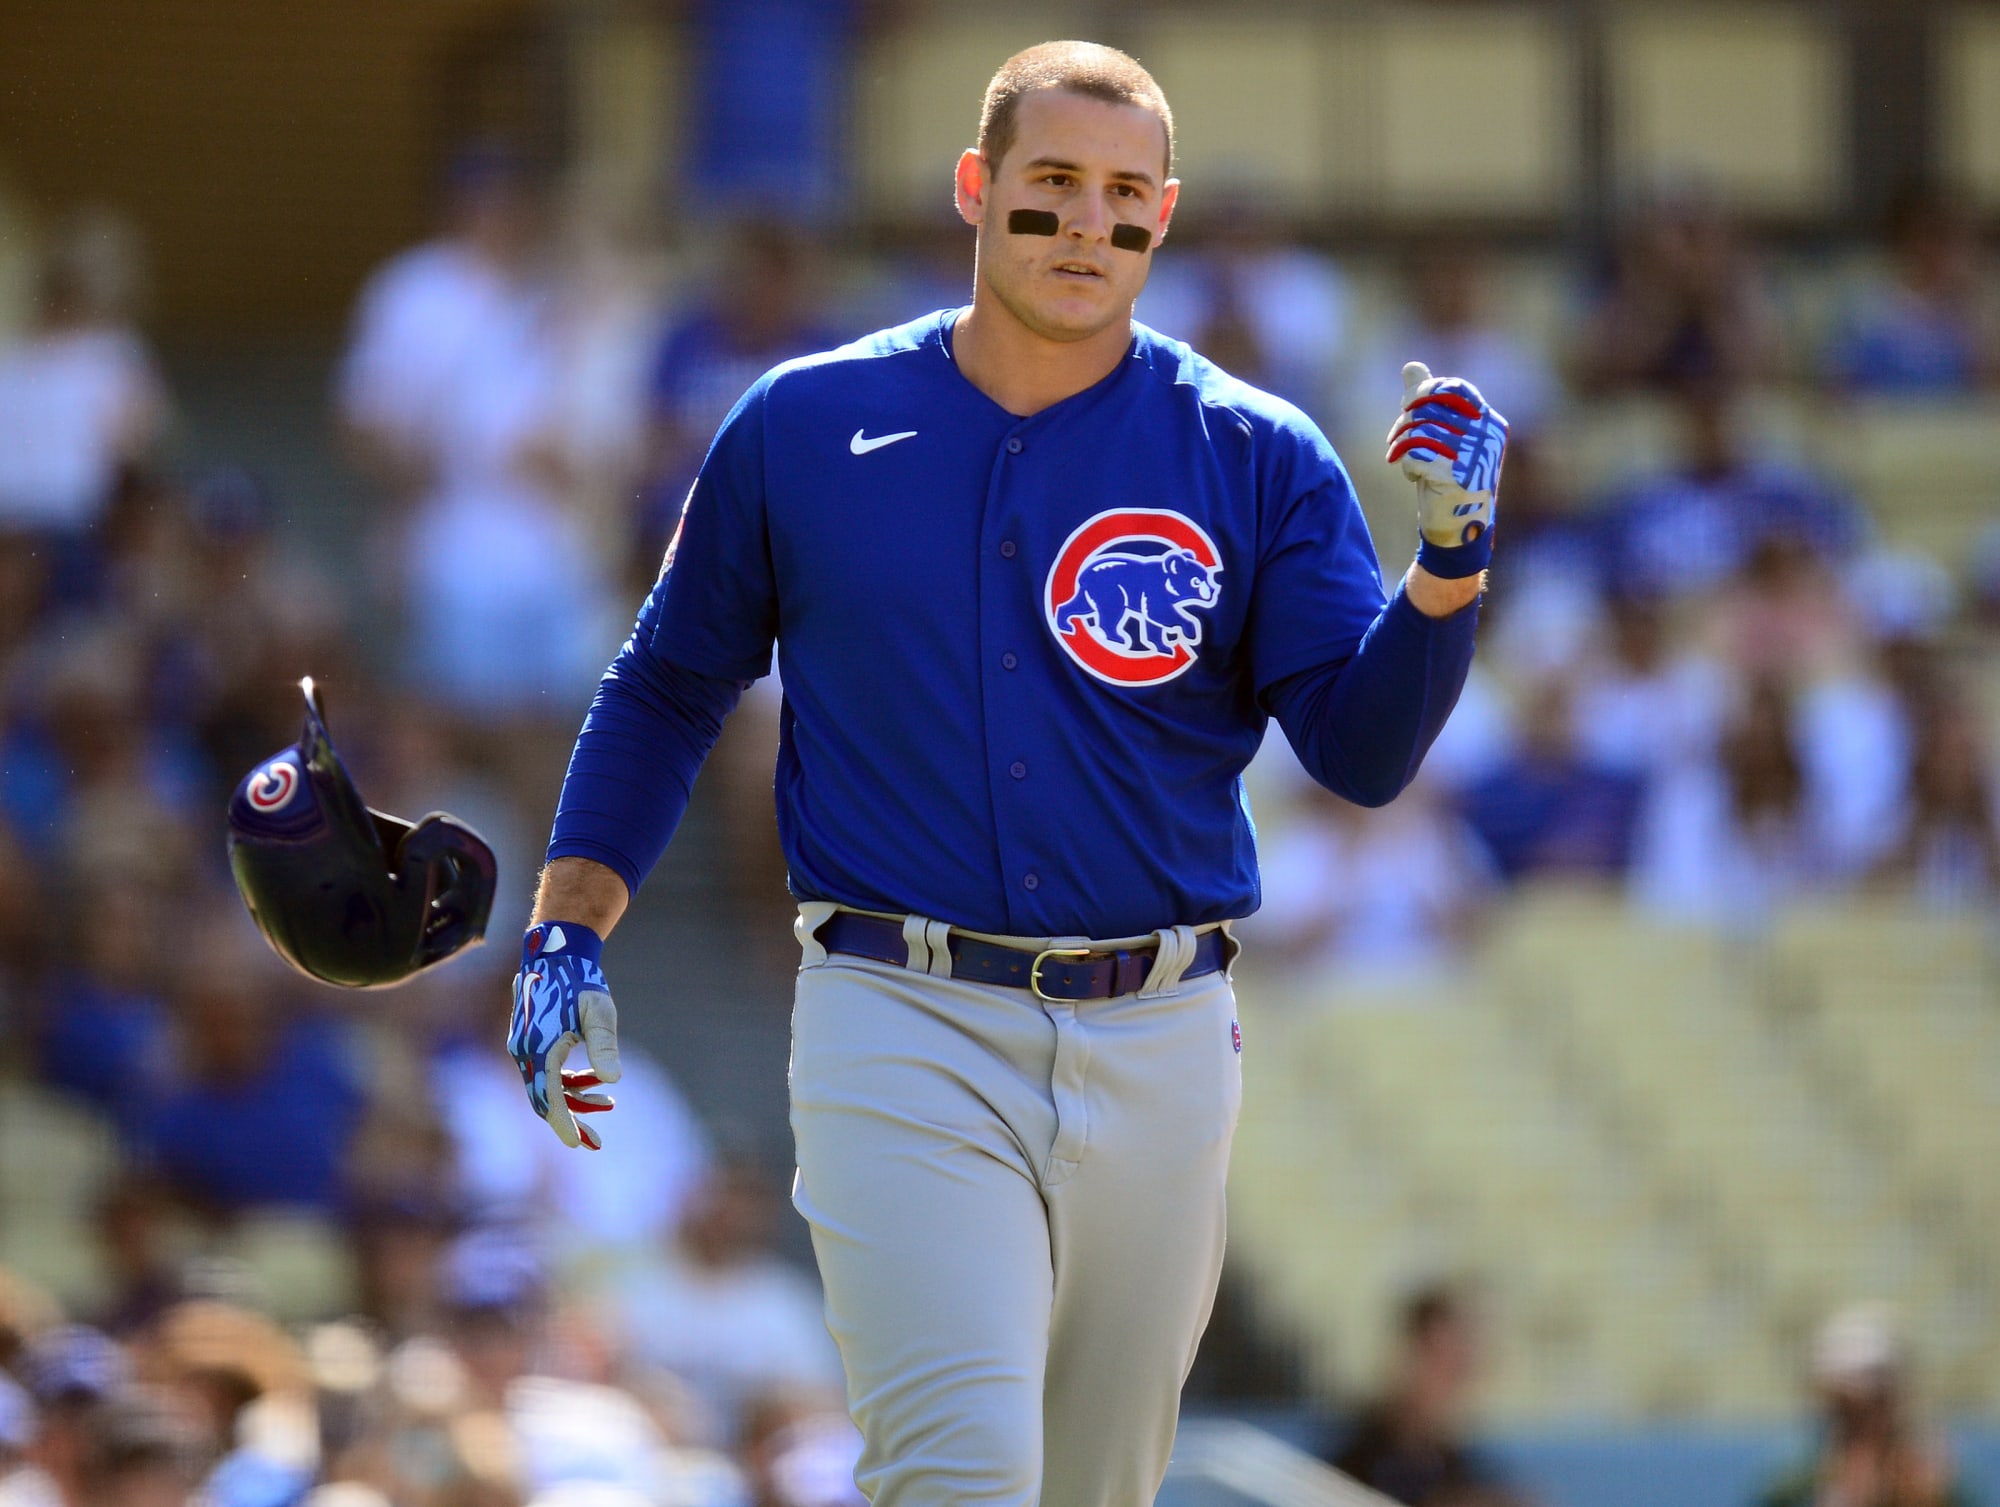 Rizzo remains the heart & soul of the Chicago Cubs